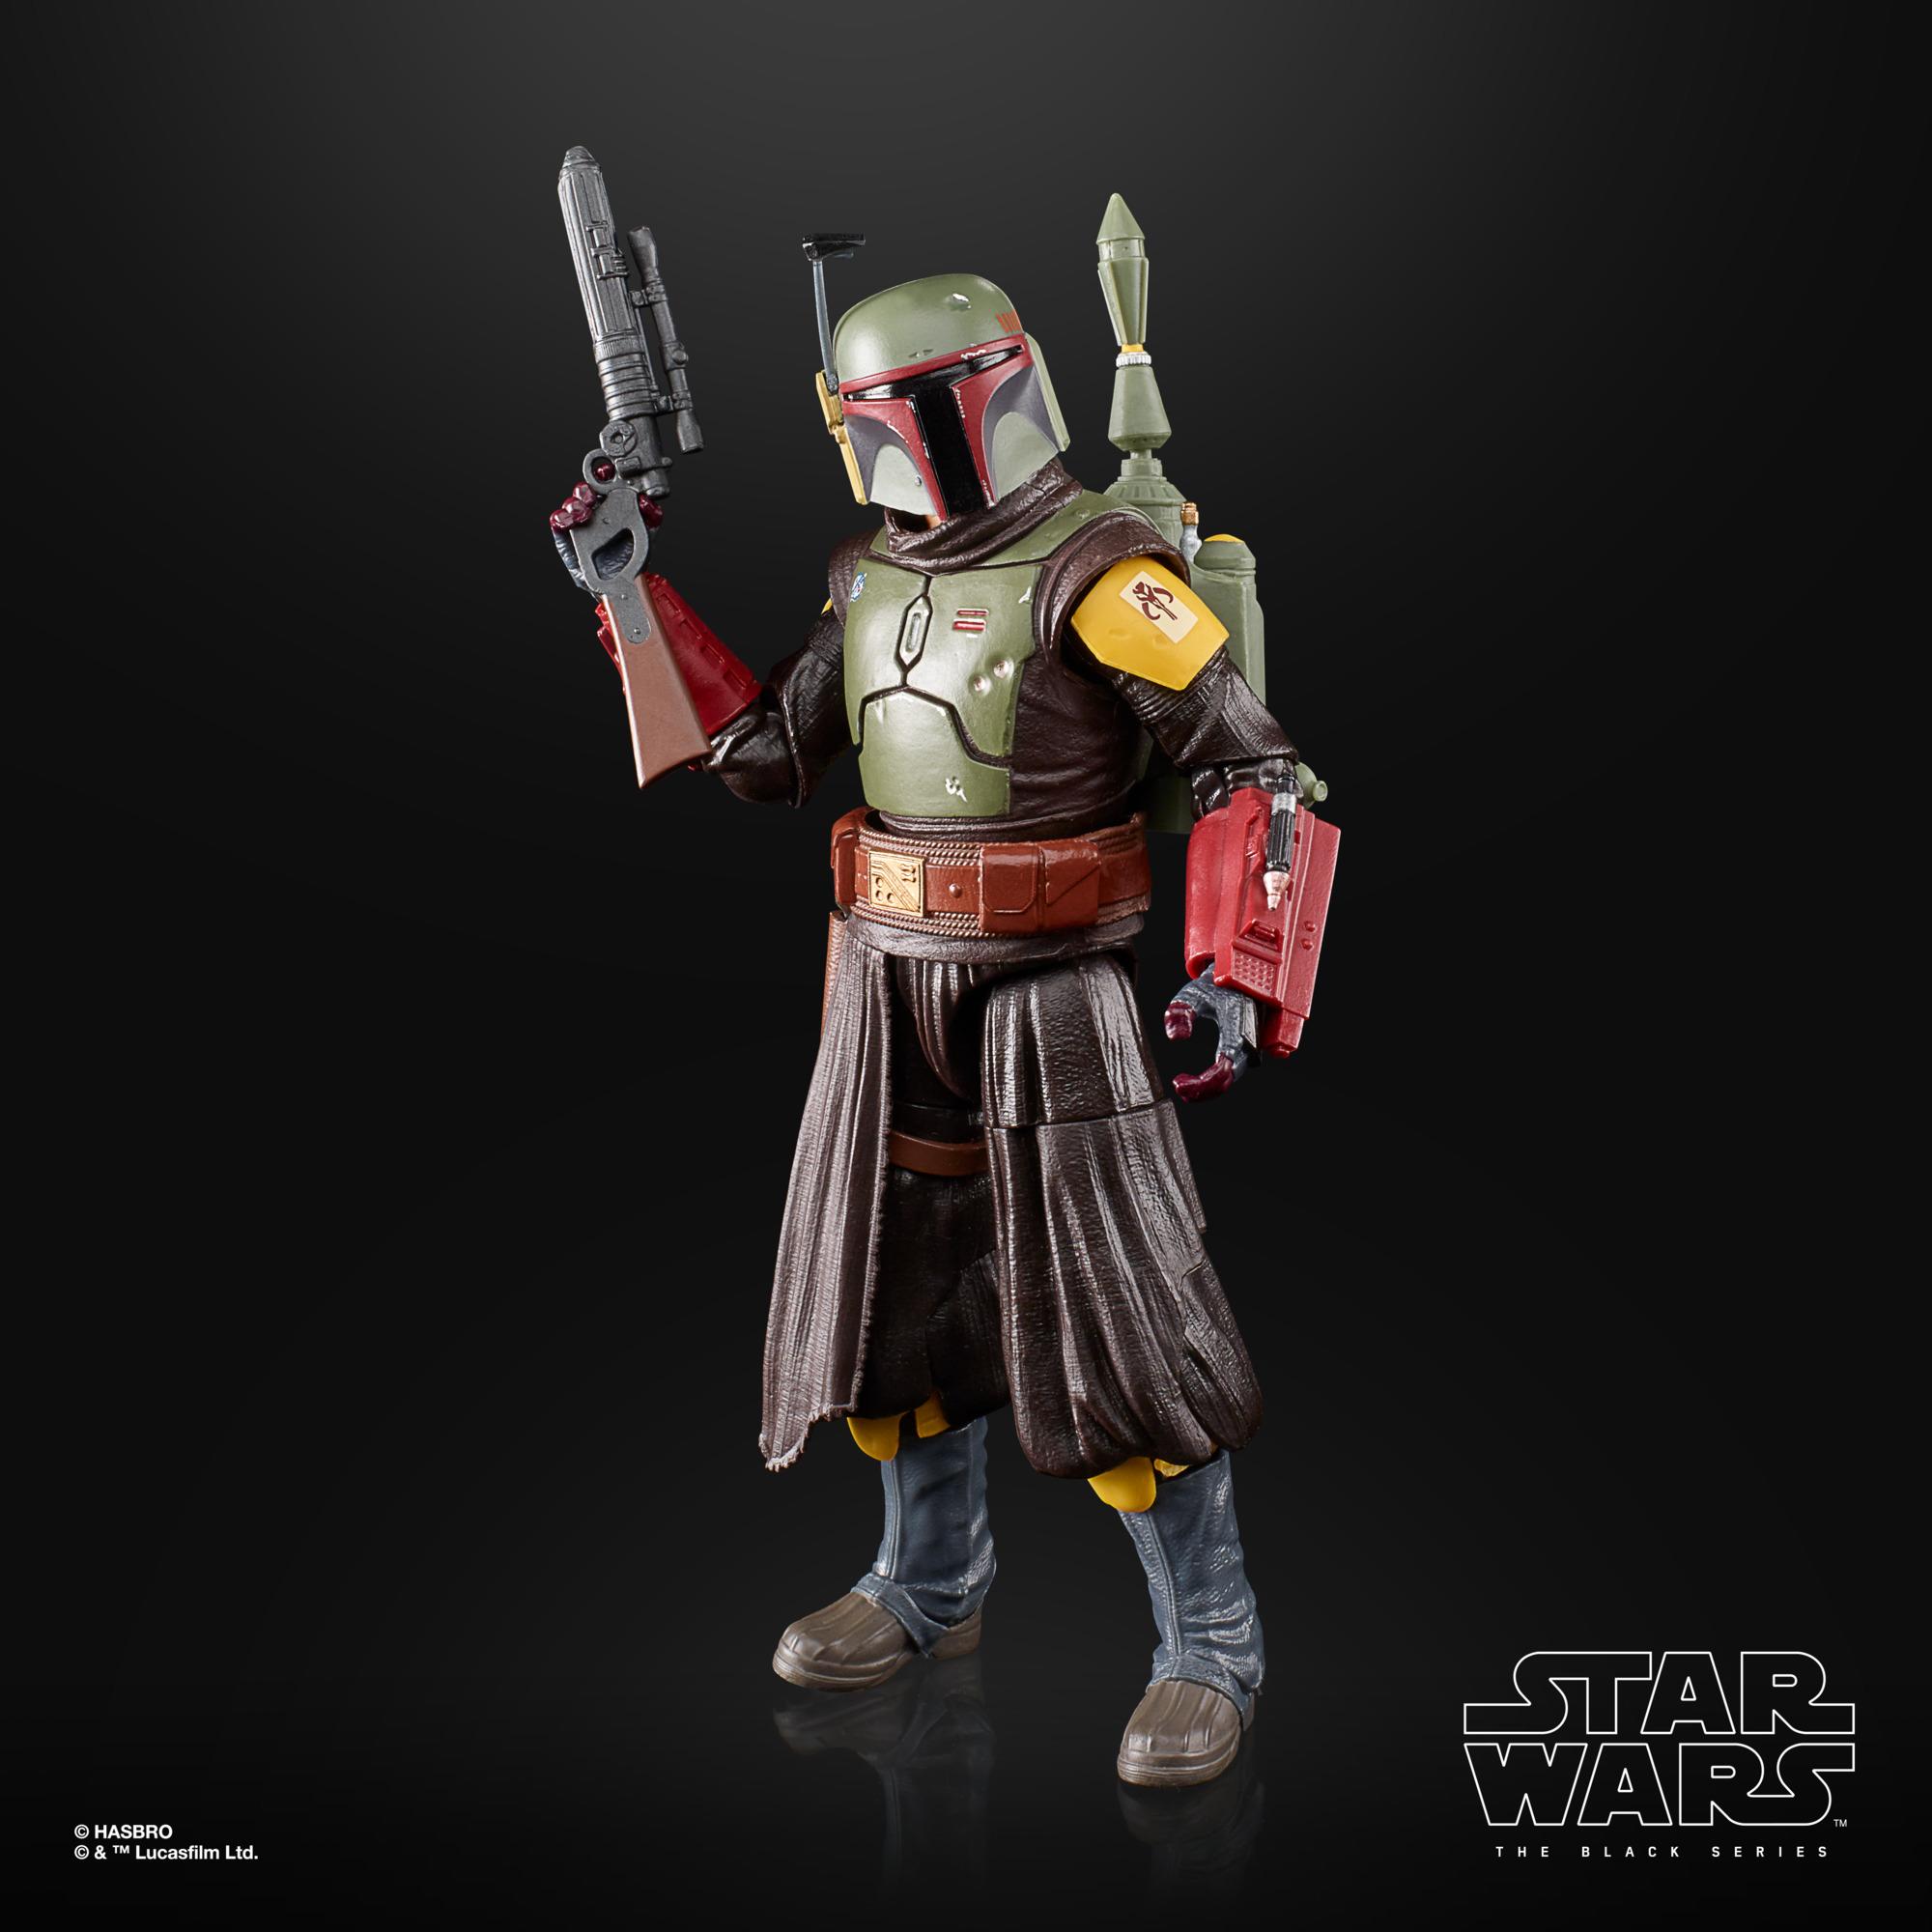 Star Wars Black Series 6 Inch Deluxe Action Figure - Boba Fett (Book of ...